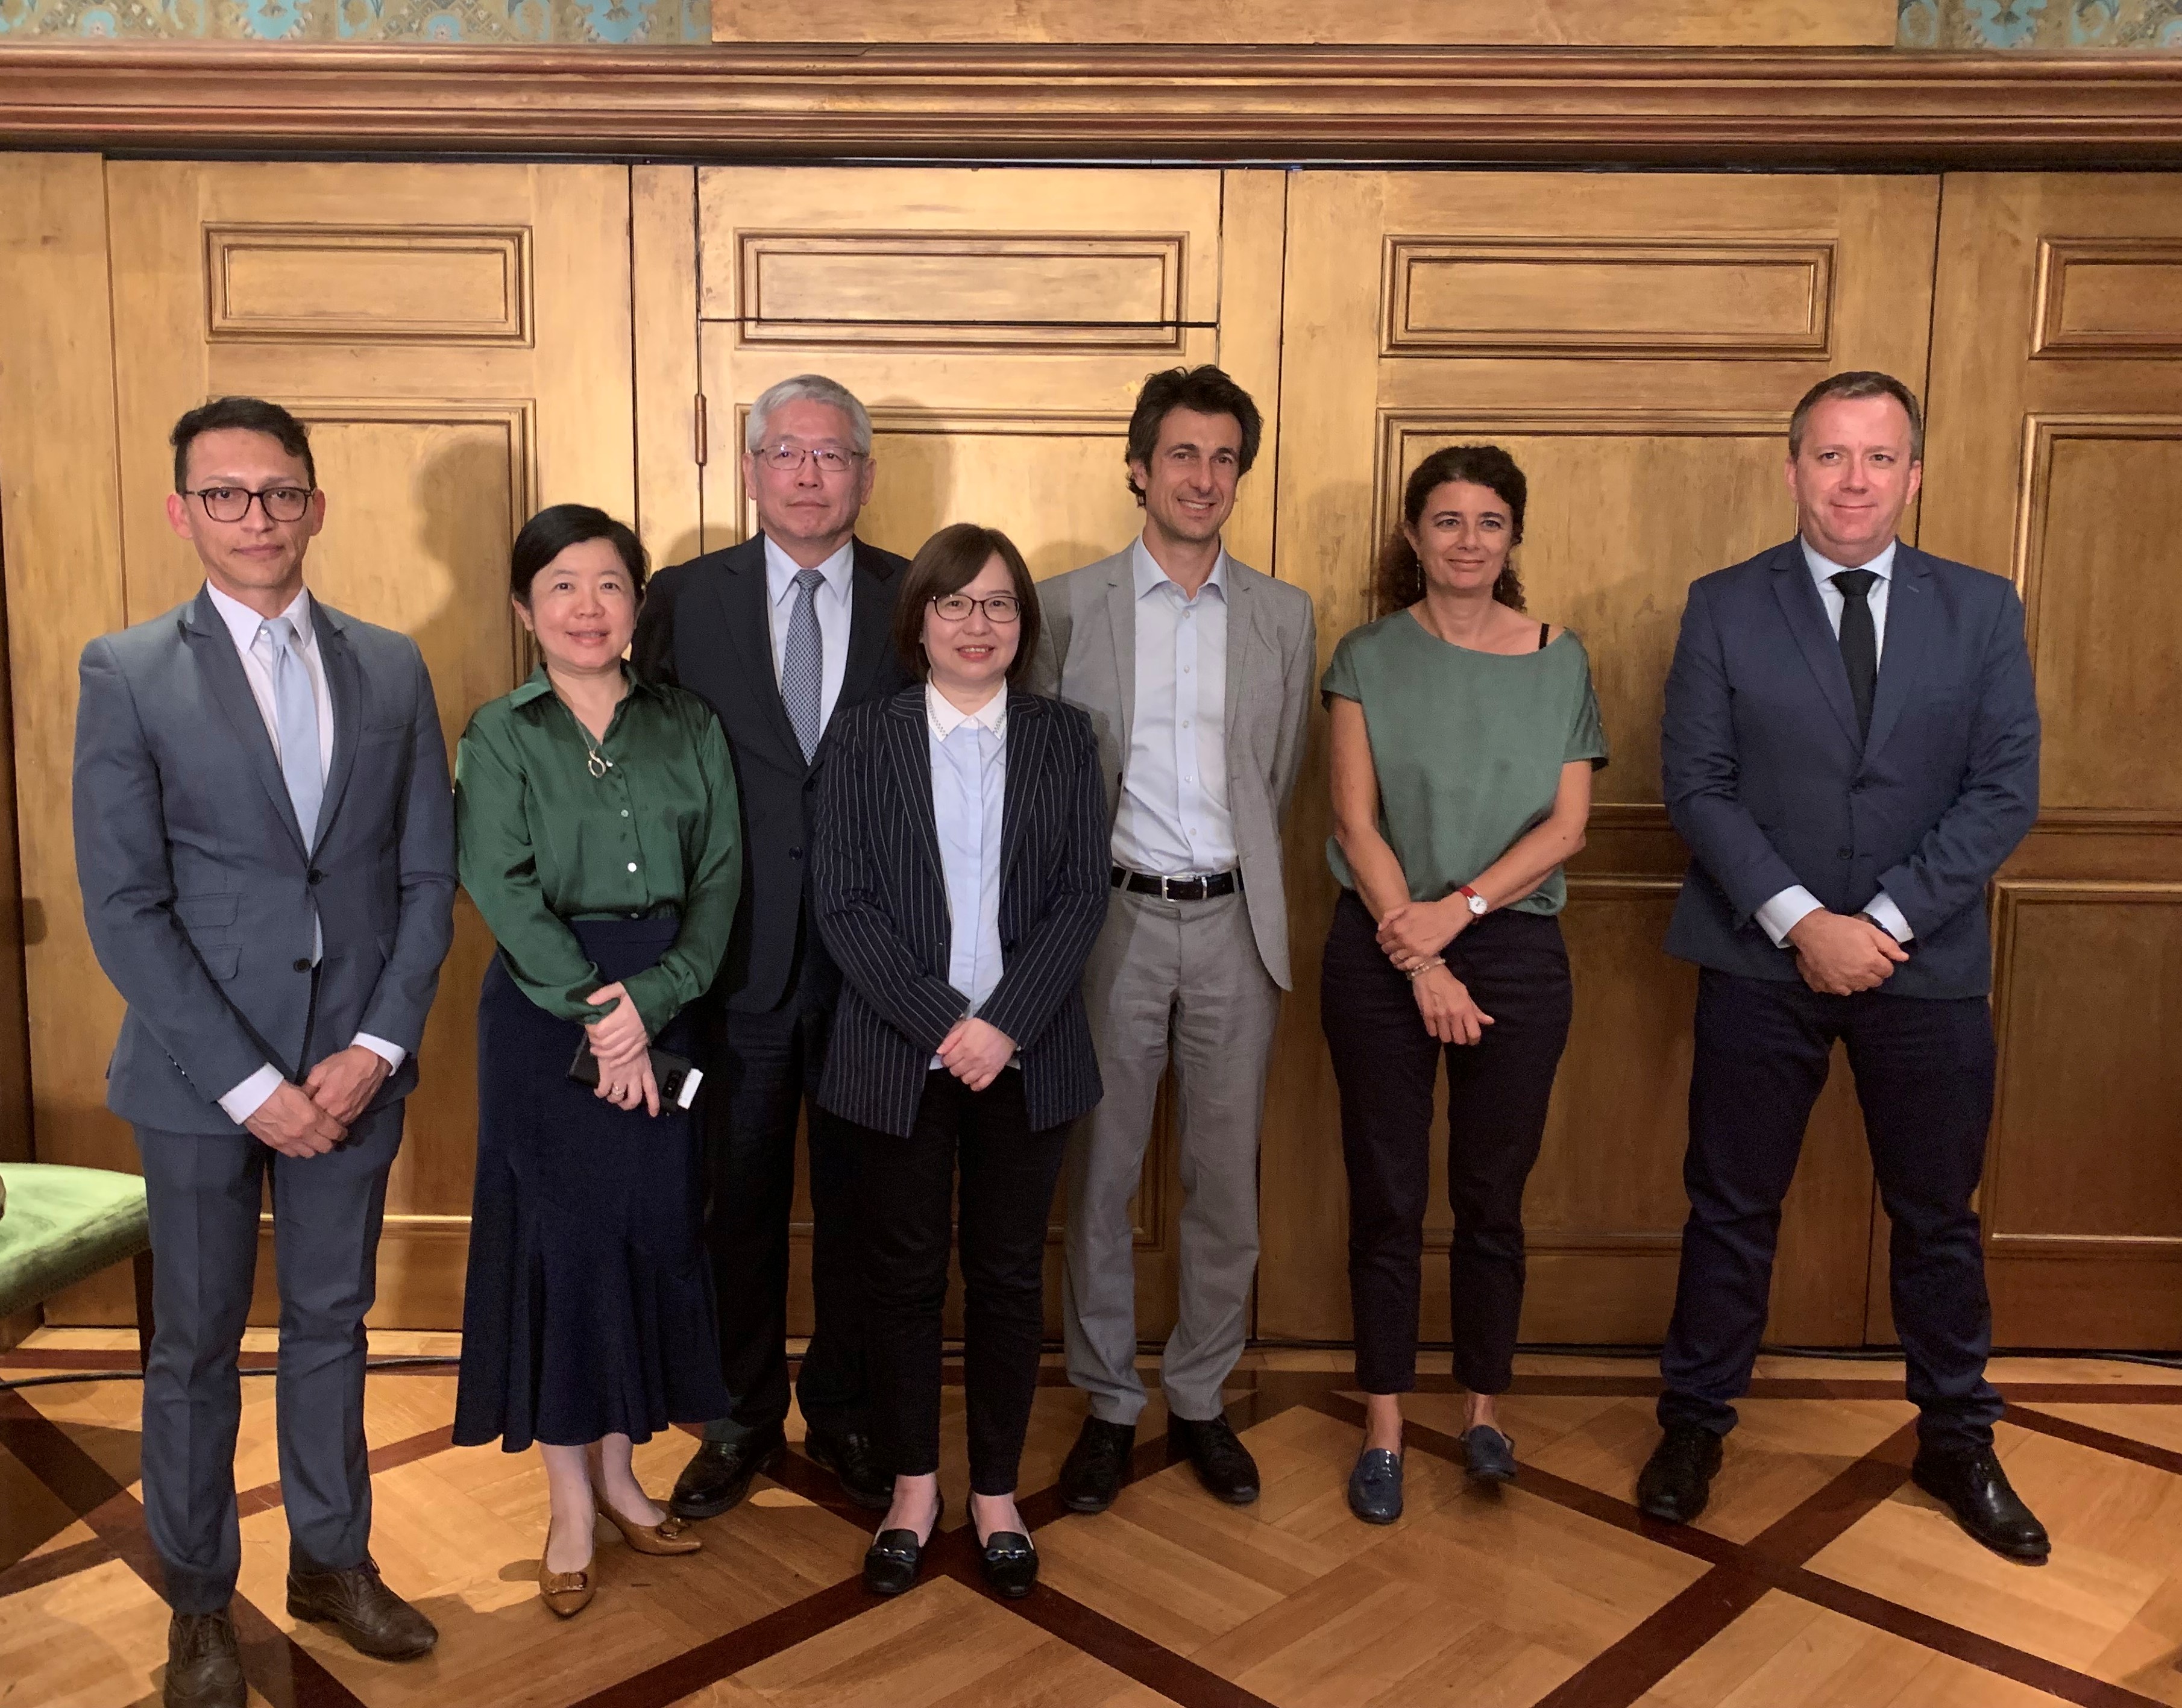 WHA Taiwan Never Absent - the International Cooperation and Development Fund (TaiwanICDF), United States Agency for International Development (USAID) and Norwegian Refugee Council (NRC) co-hosted a forum in Geneva